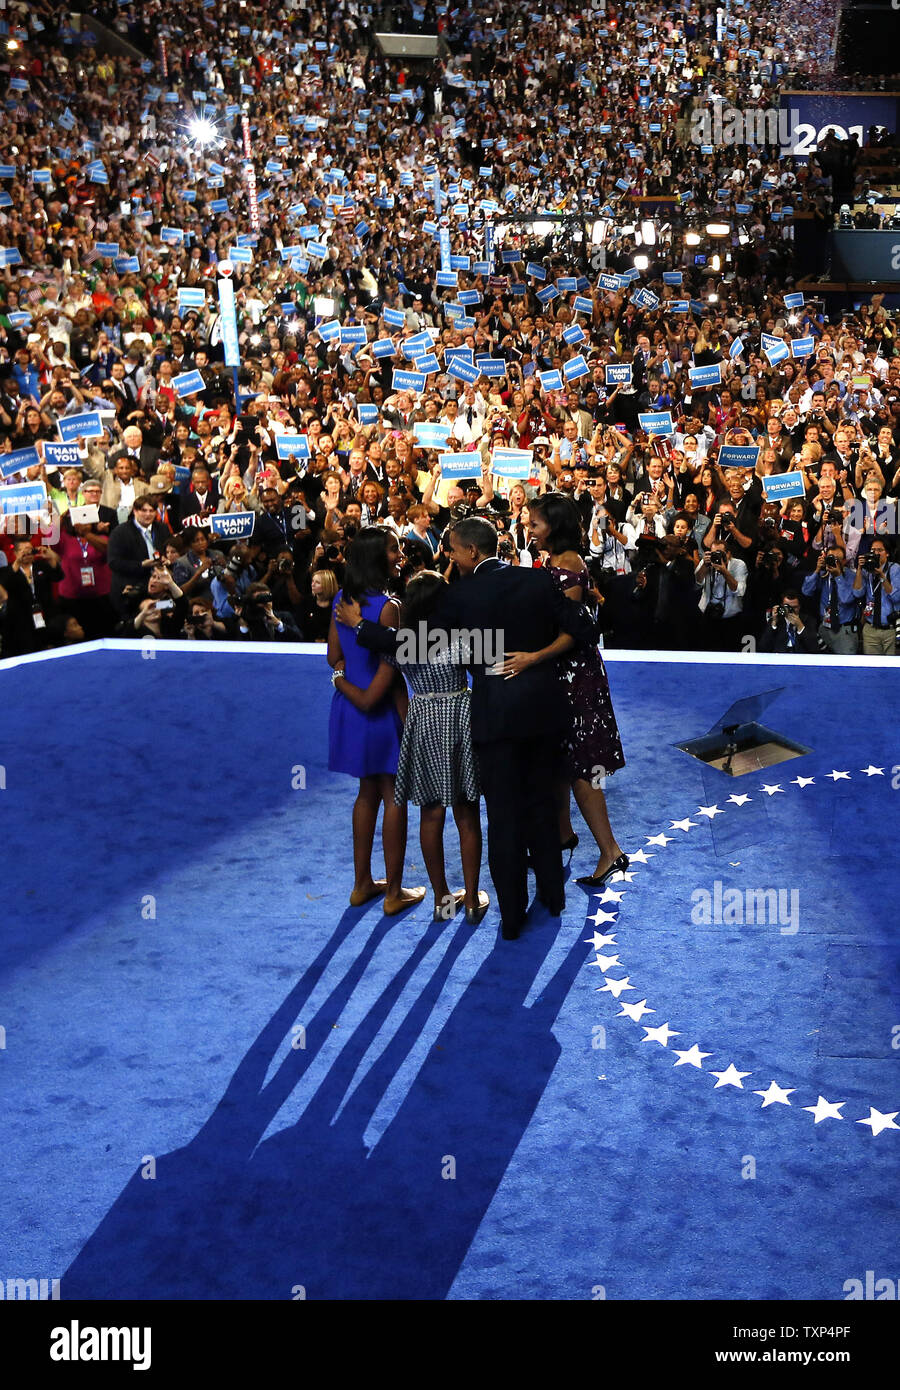 President Barack Obama hugs his family after giving his acceptance speech during the 2012 Democratic National Convention at the Time Warner Cable Arena in Charlotte, North Carolina on September 6, 2012.          UPI/Scott Andrews   POOL Stock Photo